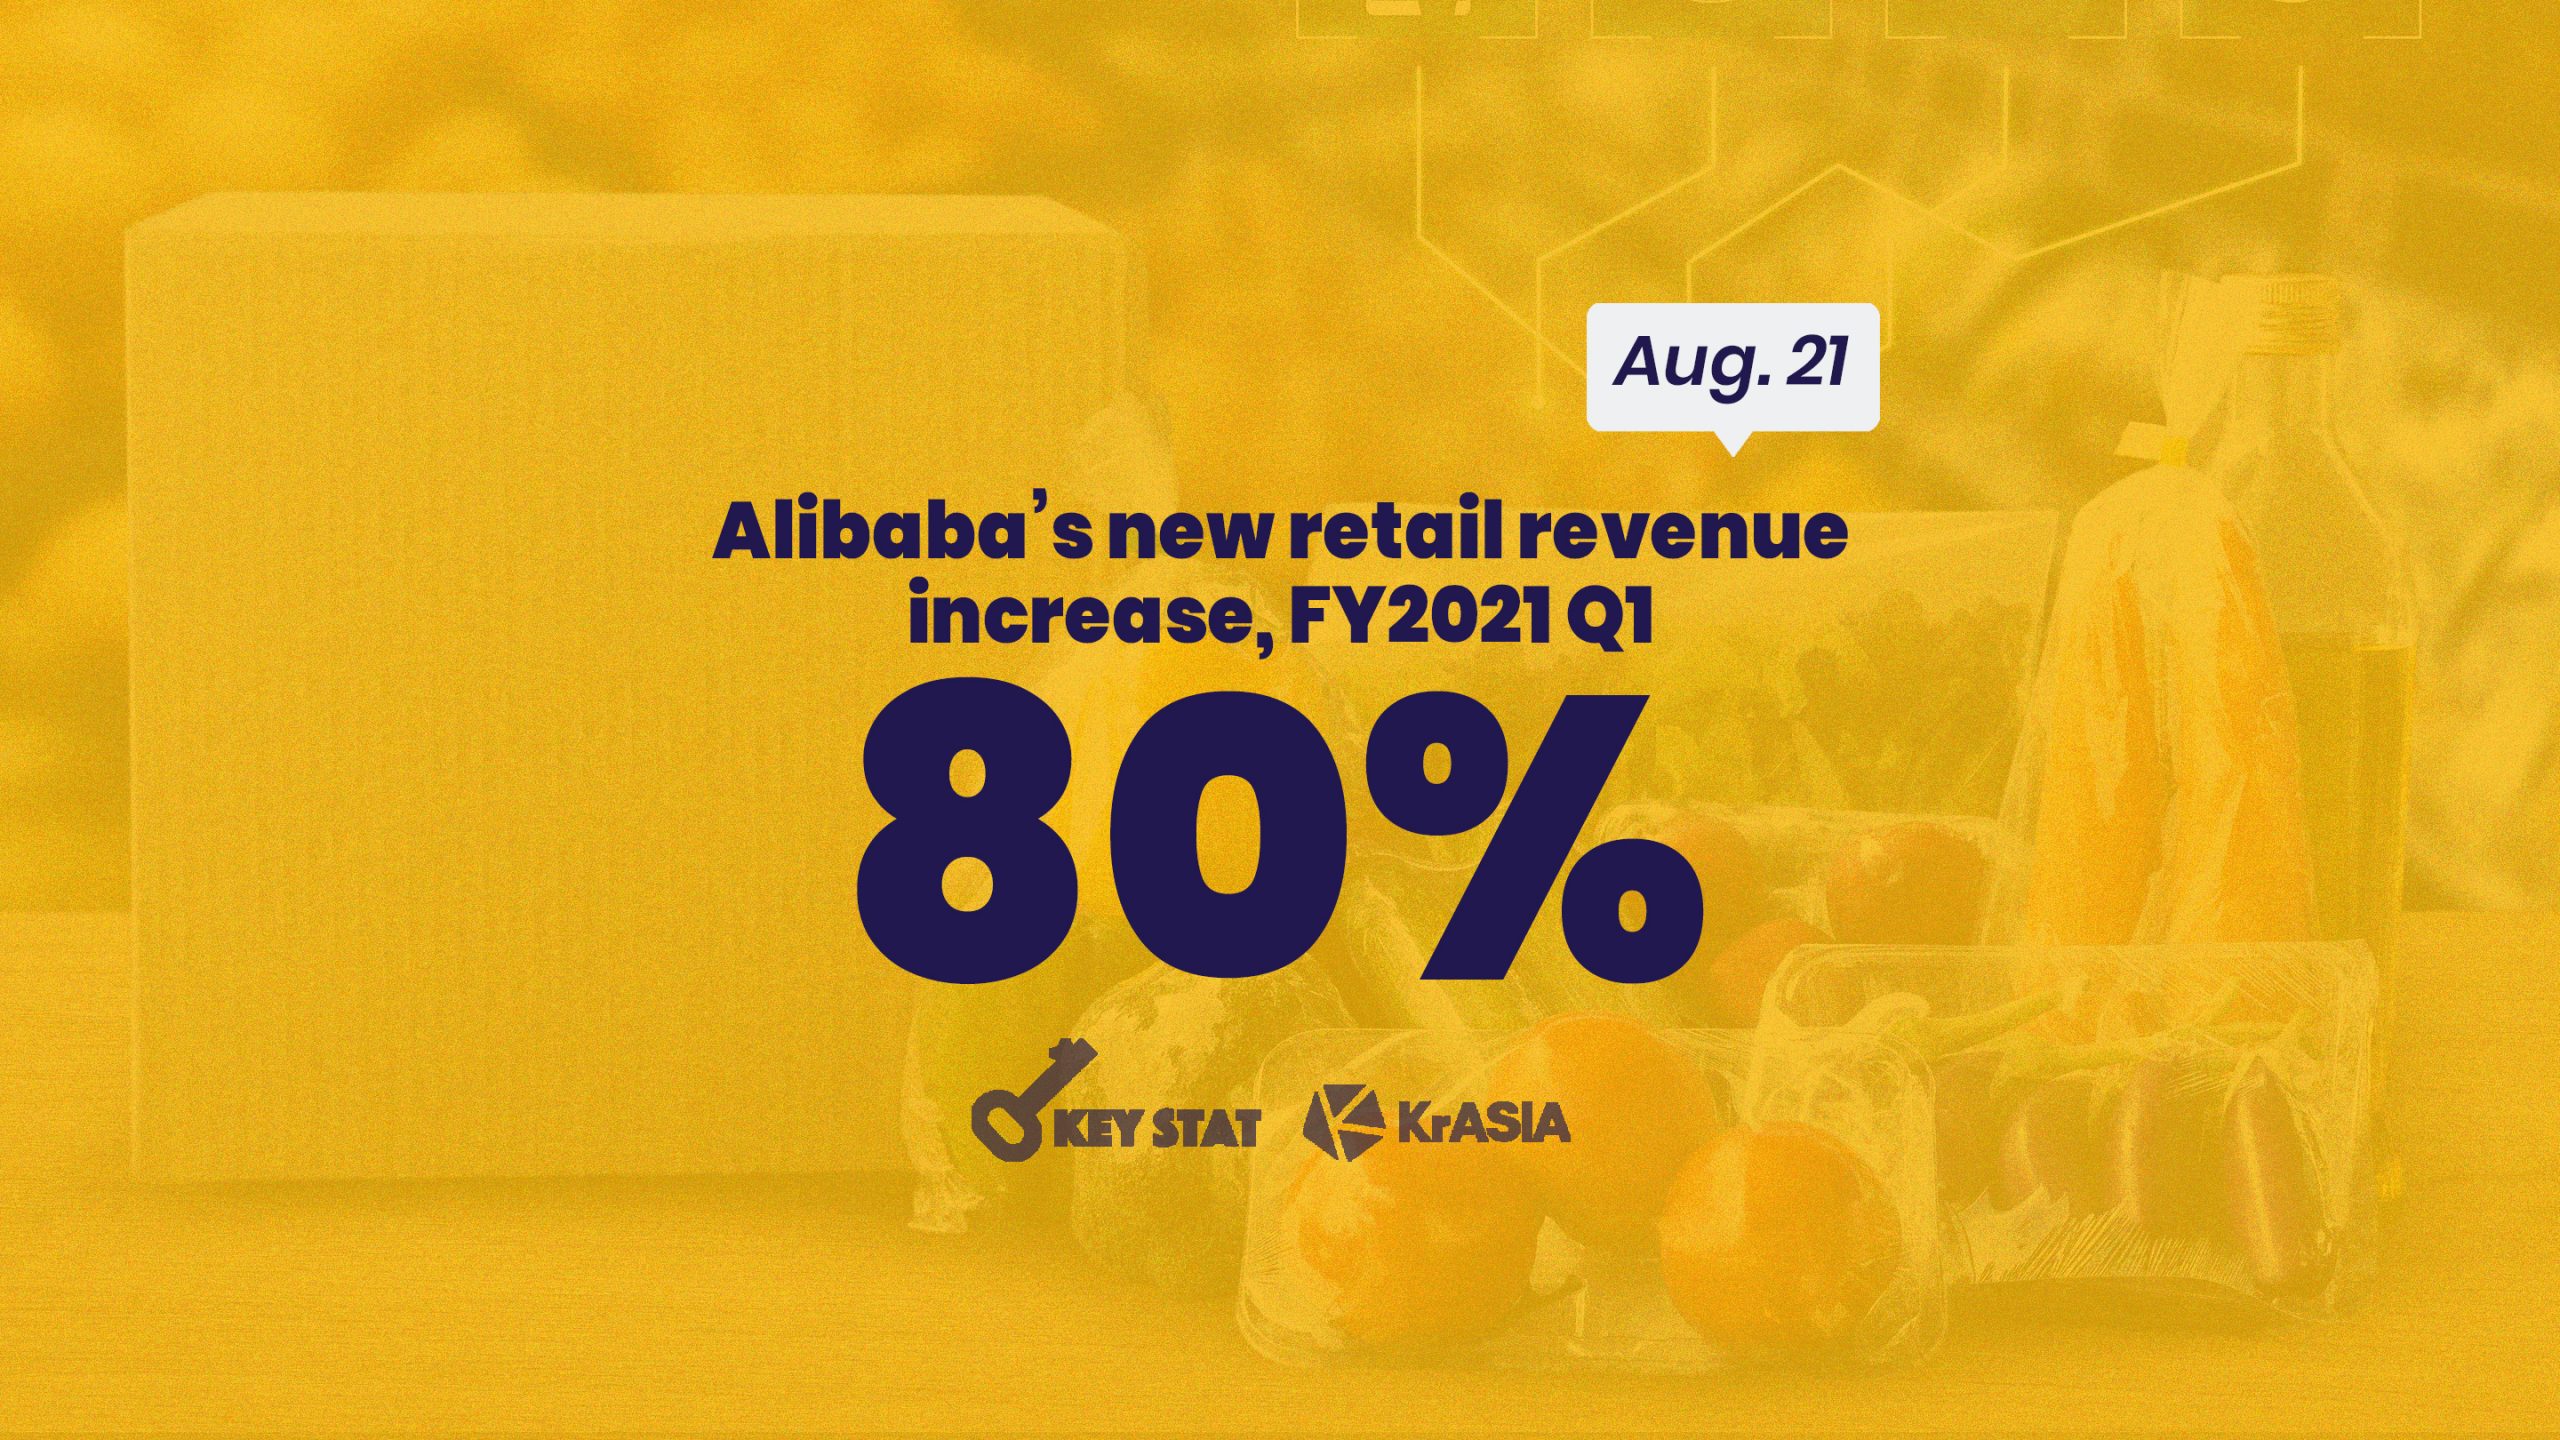 KEY STAT | New retail now accounts for one fifth of Alibaba’s revenue